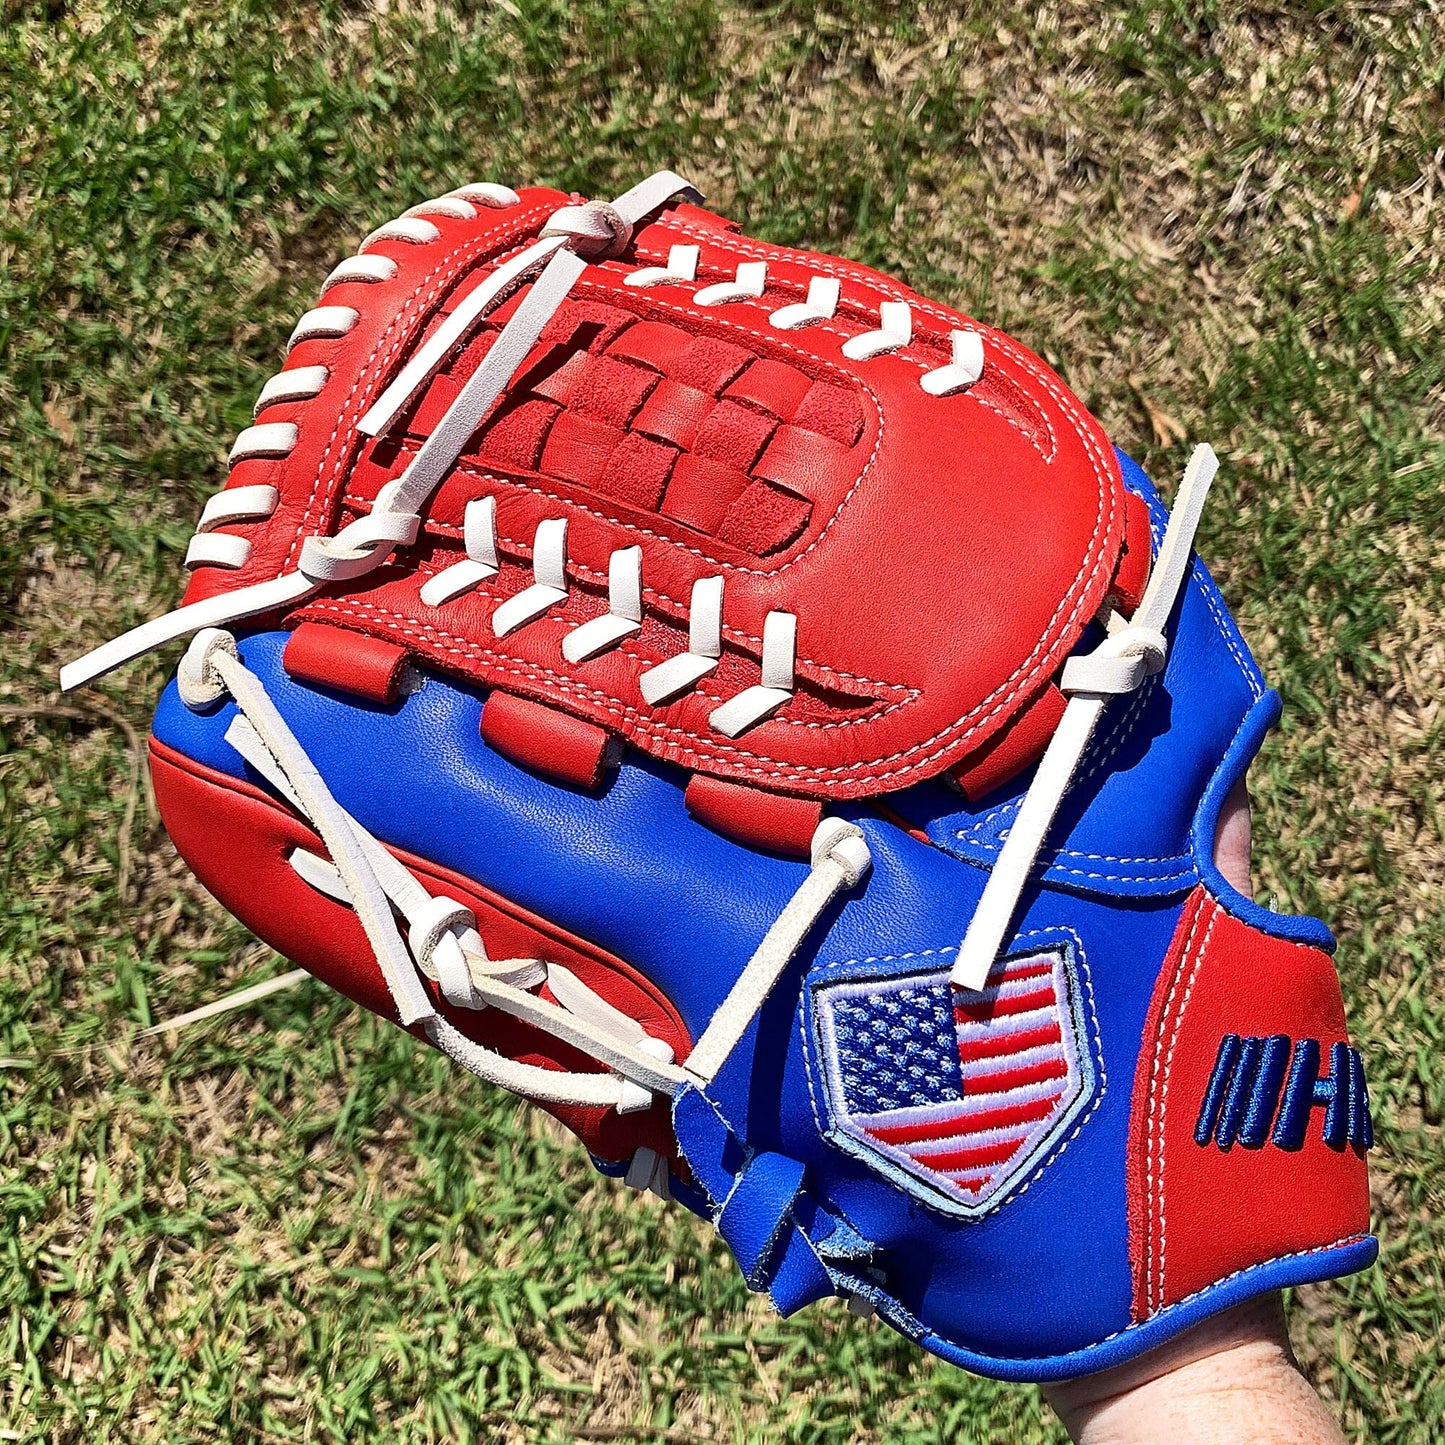 12" - Red/White/Blue -Grid and Net Web